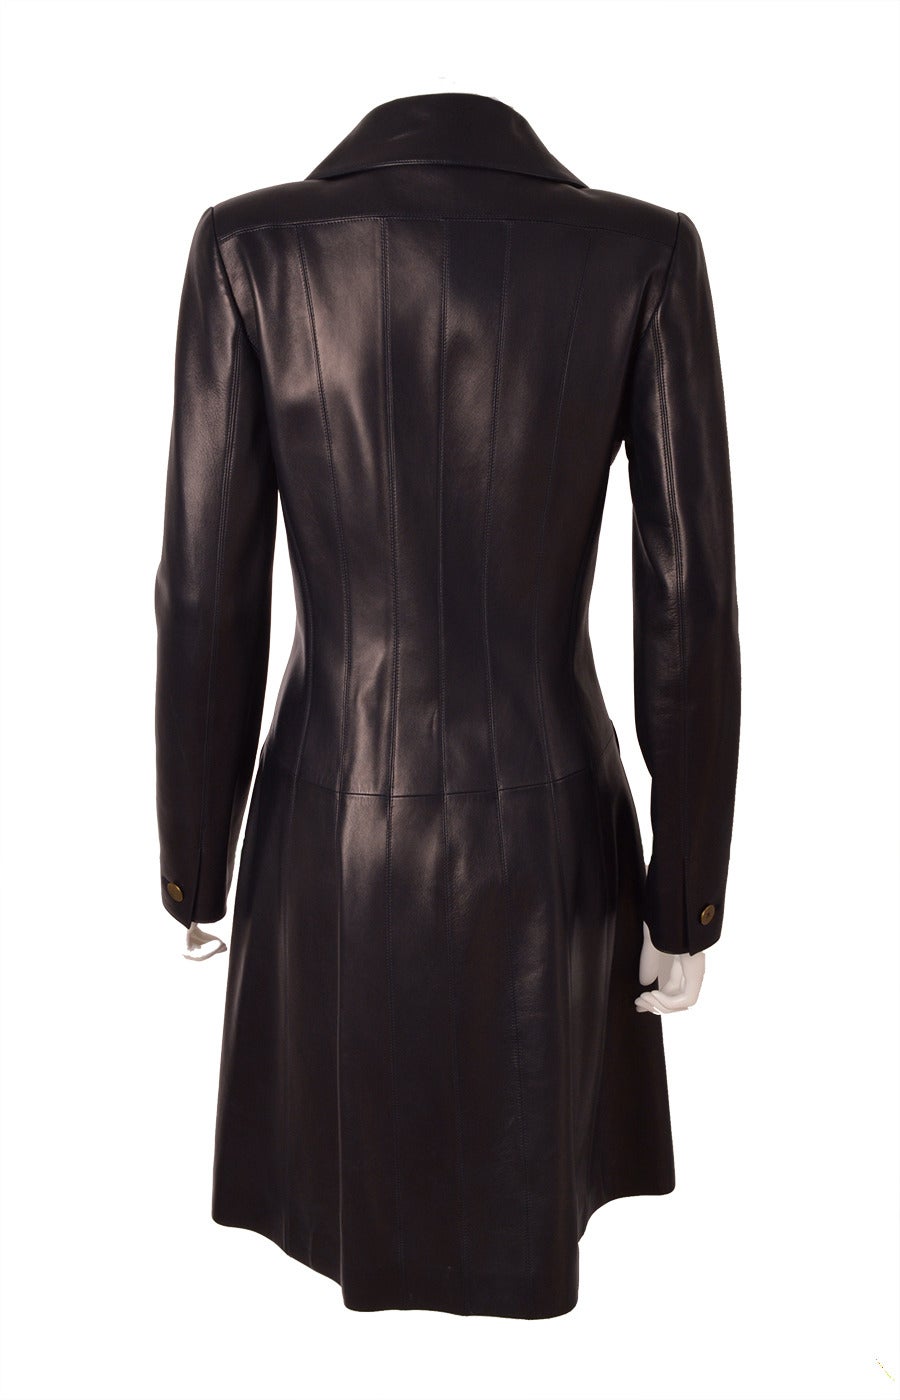 An exquisite Chanel double breasted lambskin leather knee length coat. This  beautiful silhouette features a notched lapel and four pockets: two front flap and two small flap breast pockets. Two panels sewn horizontally and seven seams at the back.